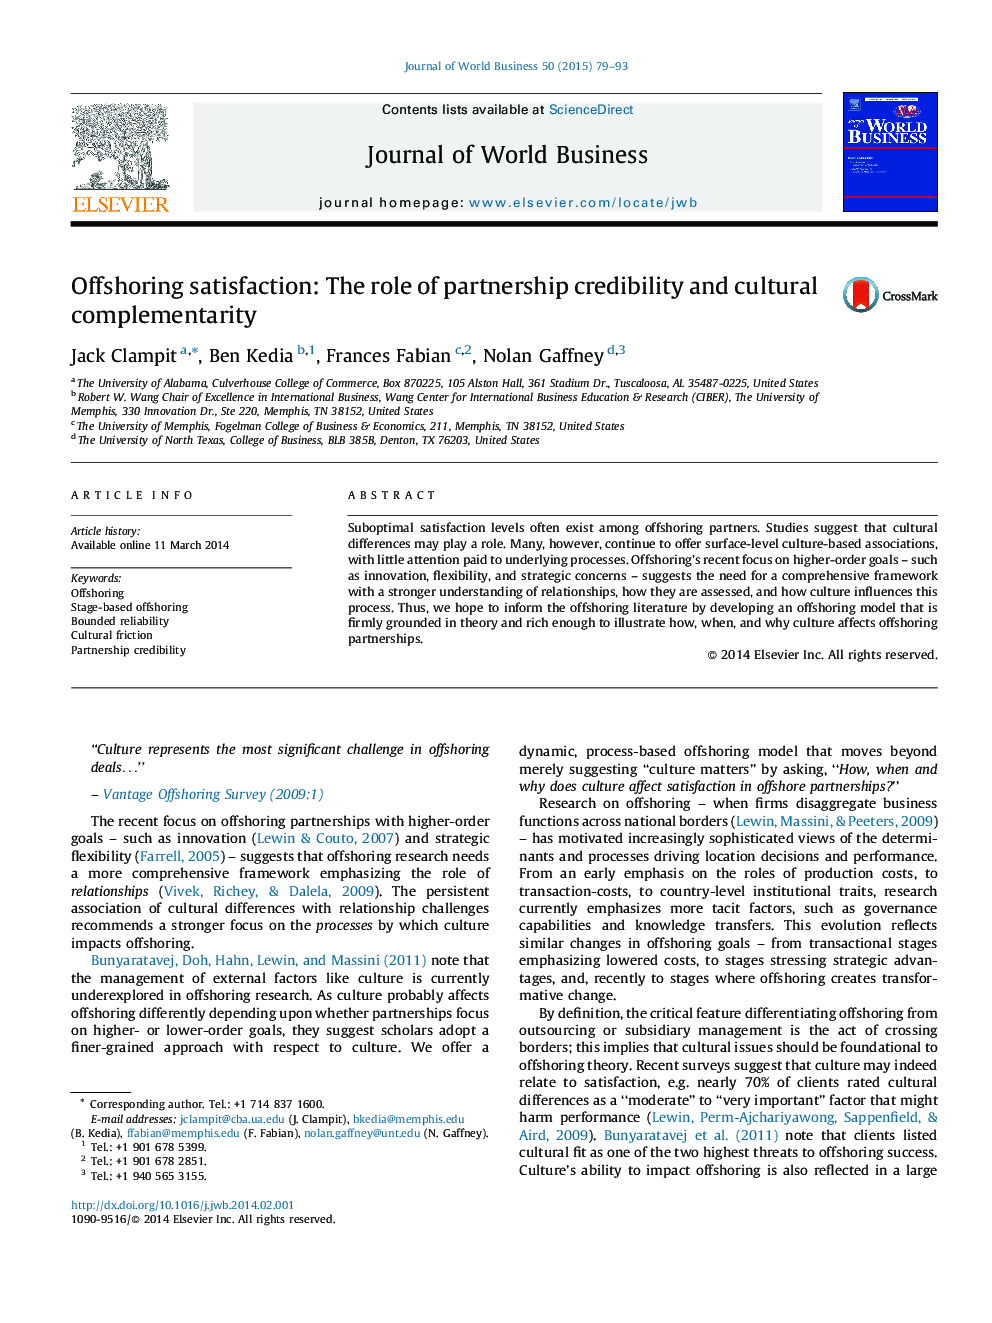 Offshoring satisfaction: The role of partnership credibility and cultural complementarity